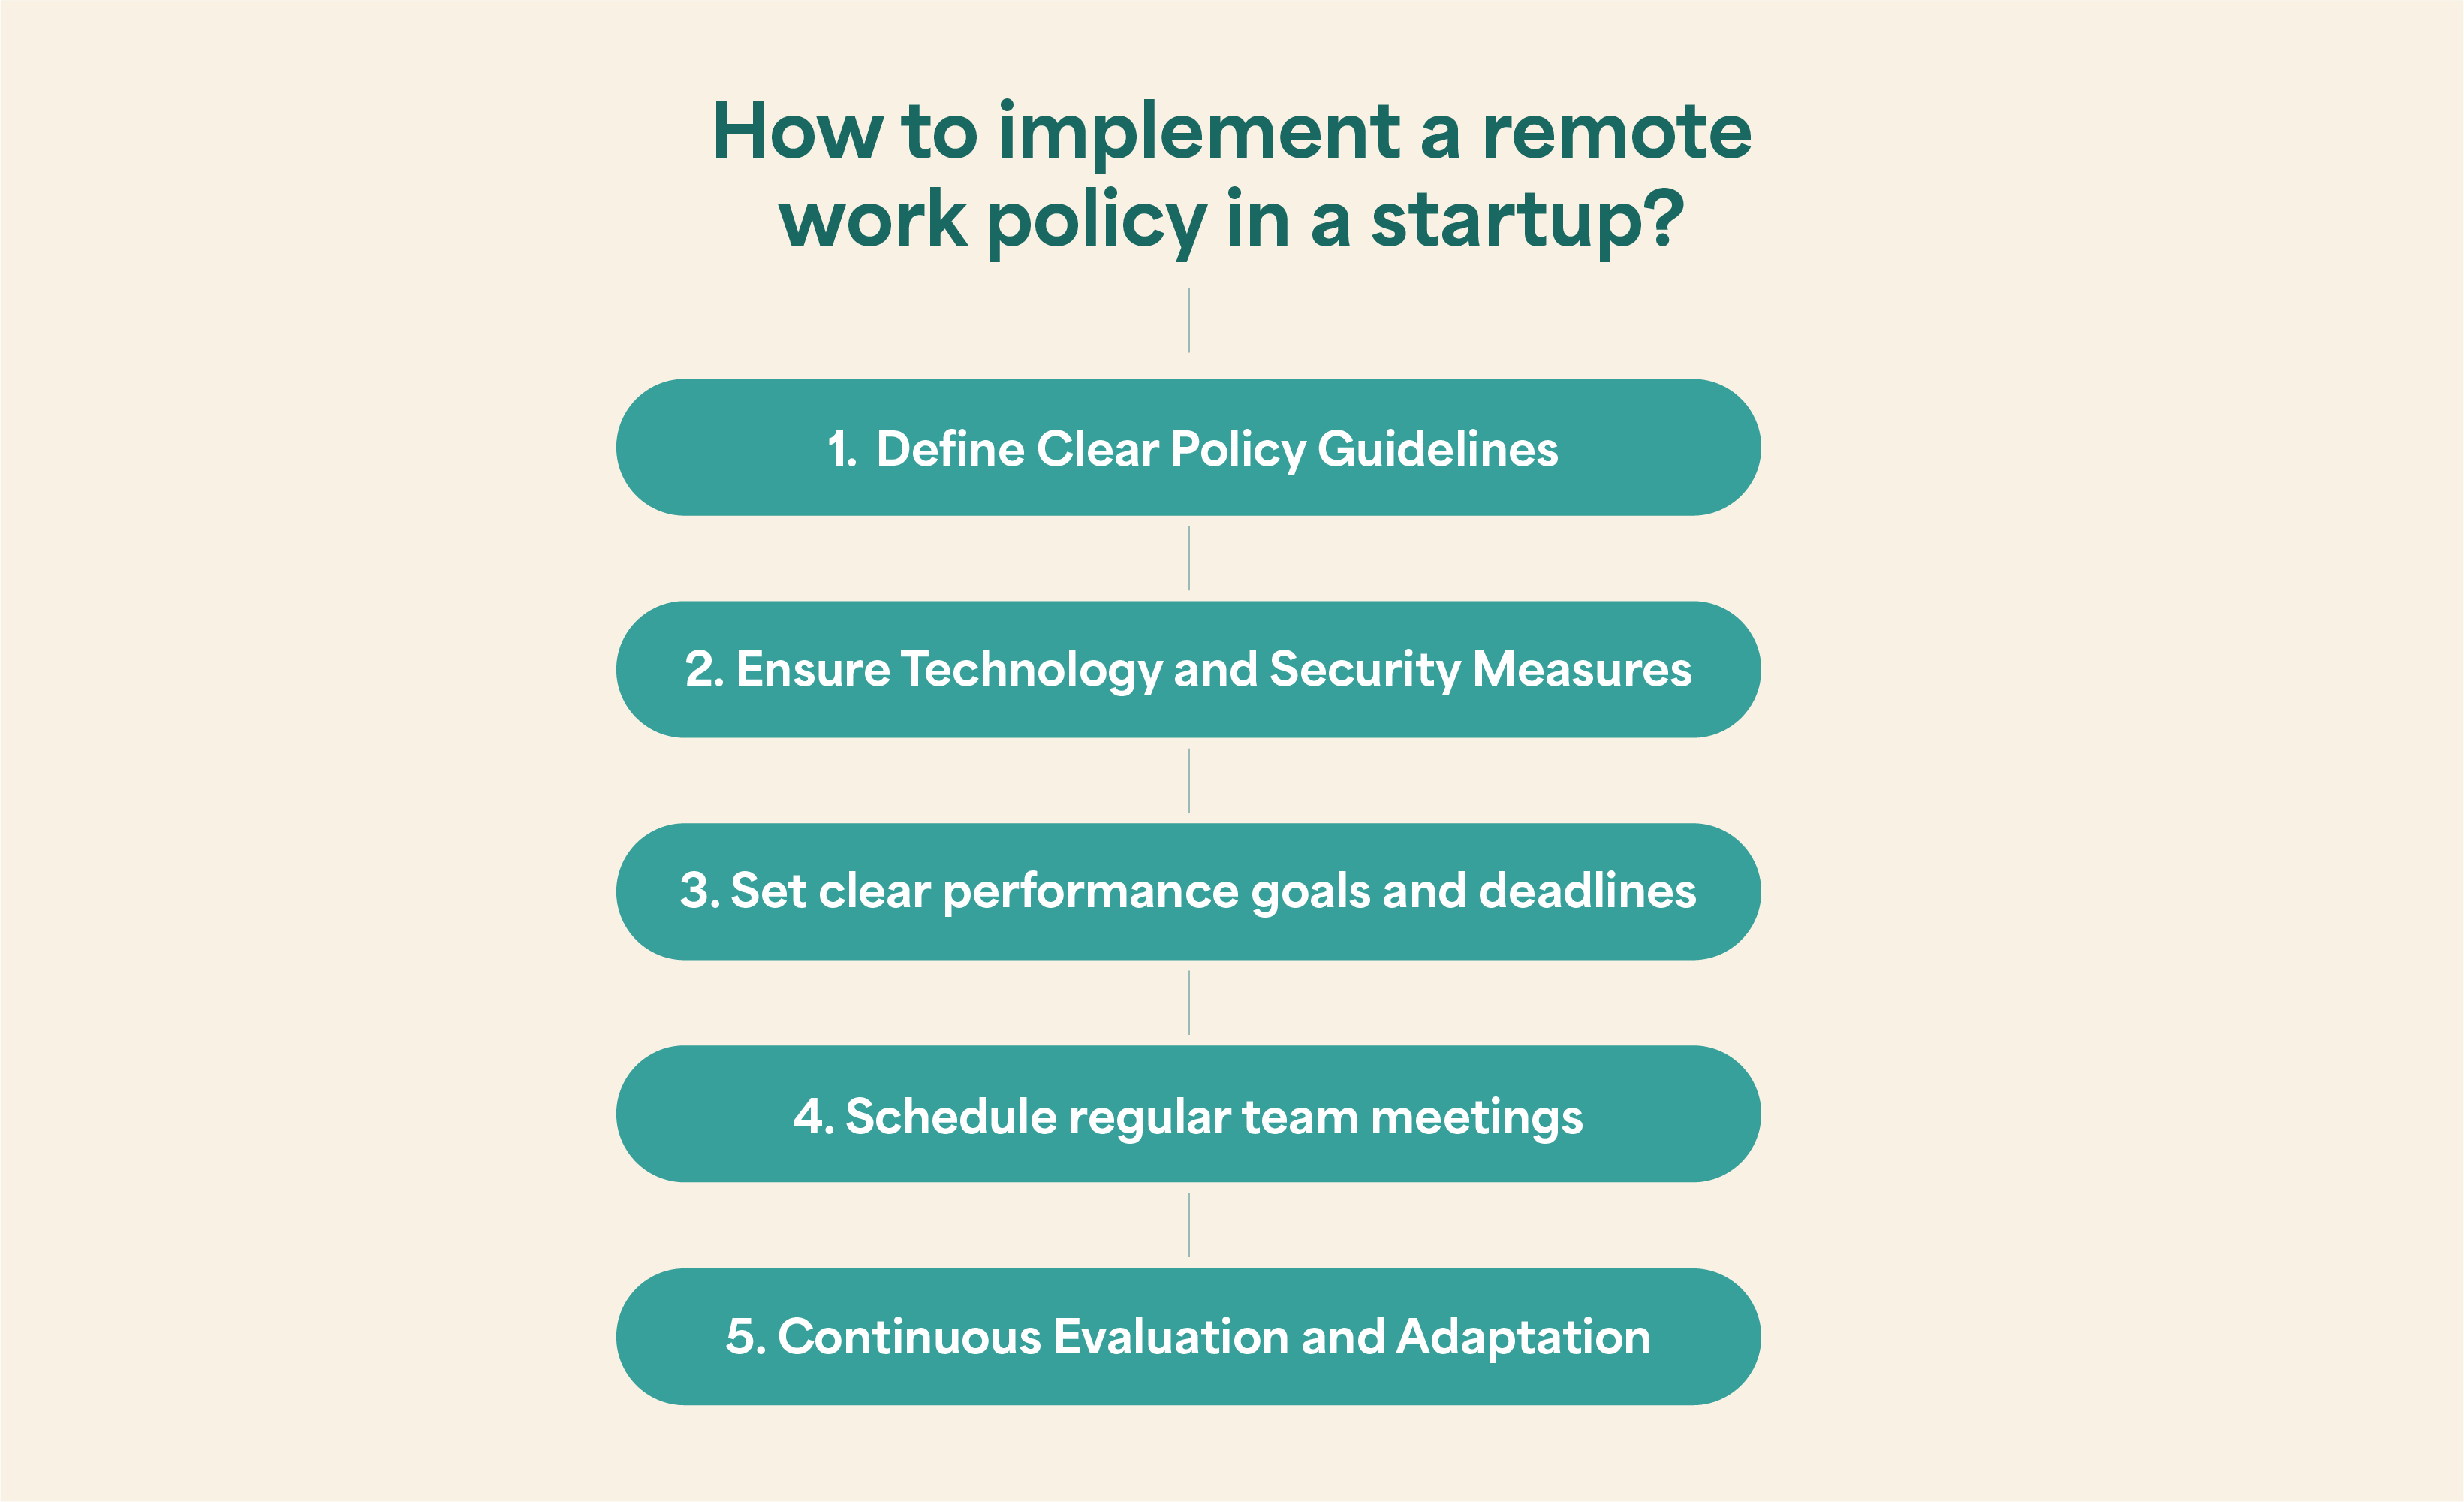 The image shows a Step-by-step depiction of the remote work policy.
                        